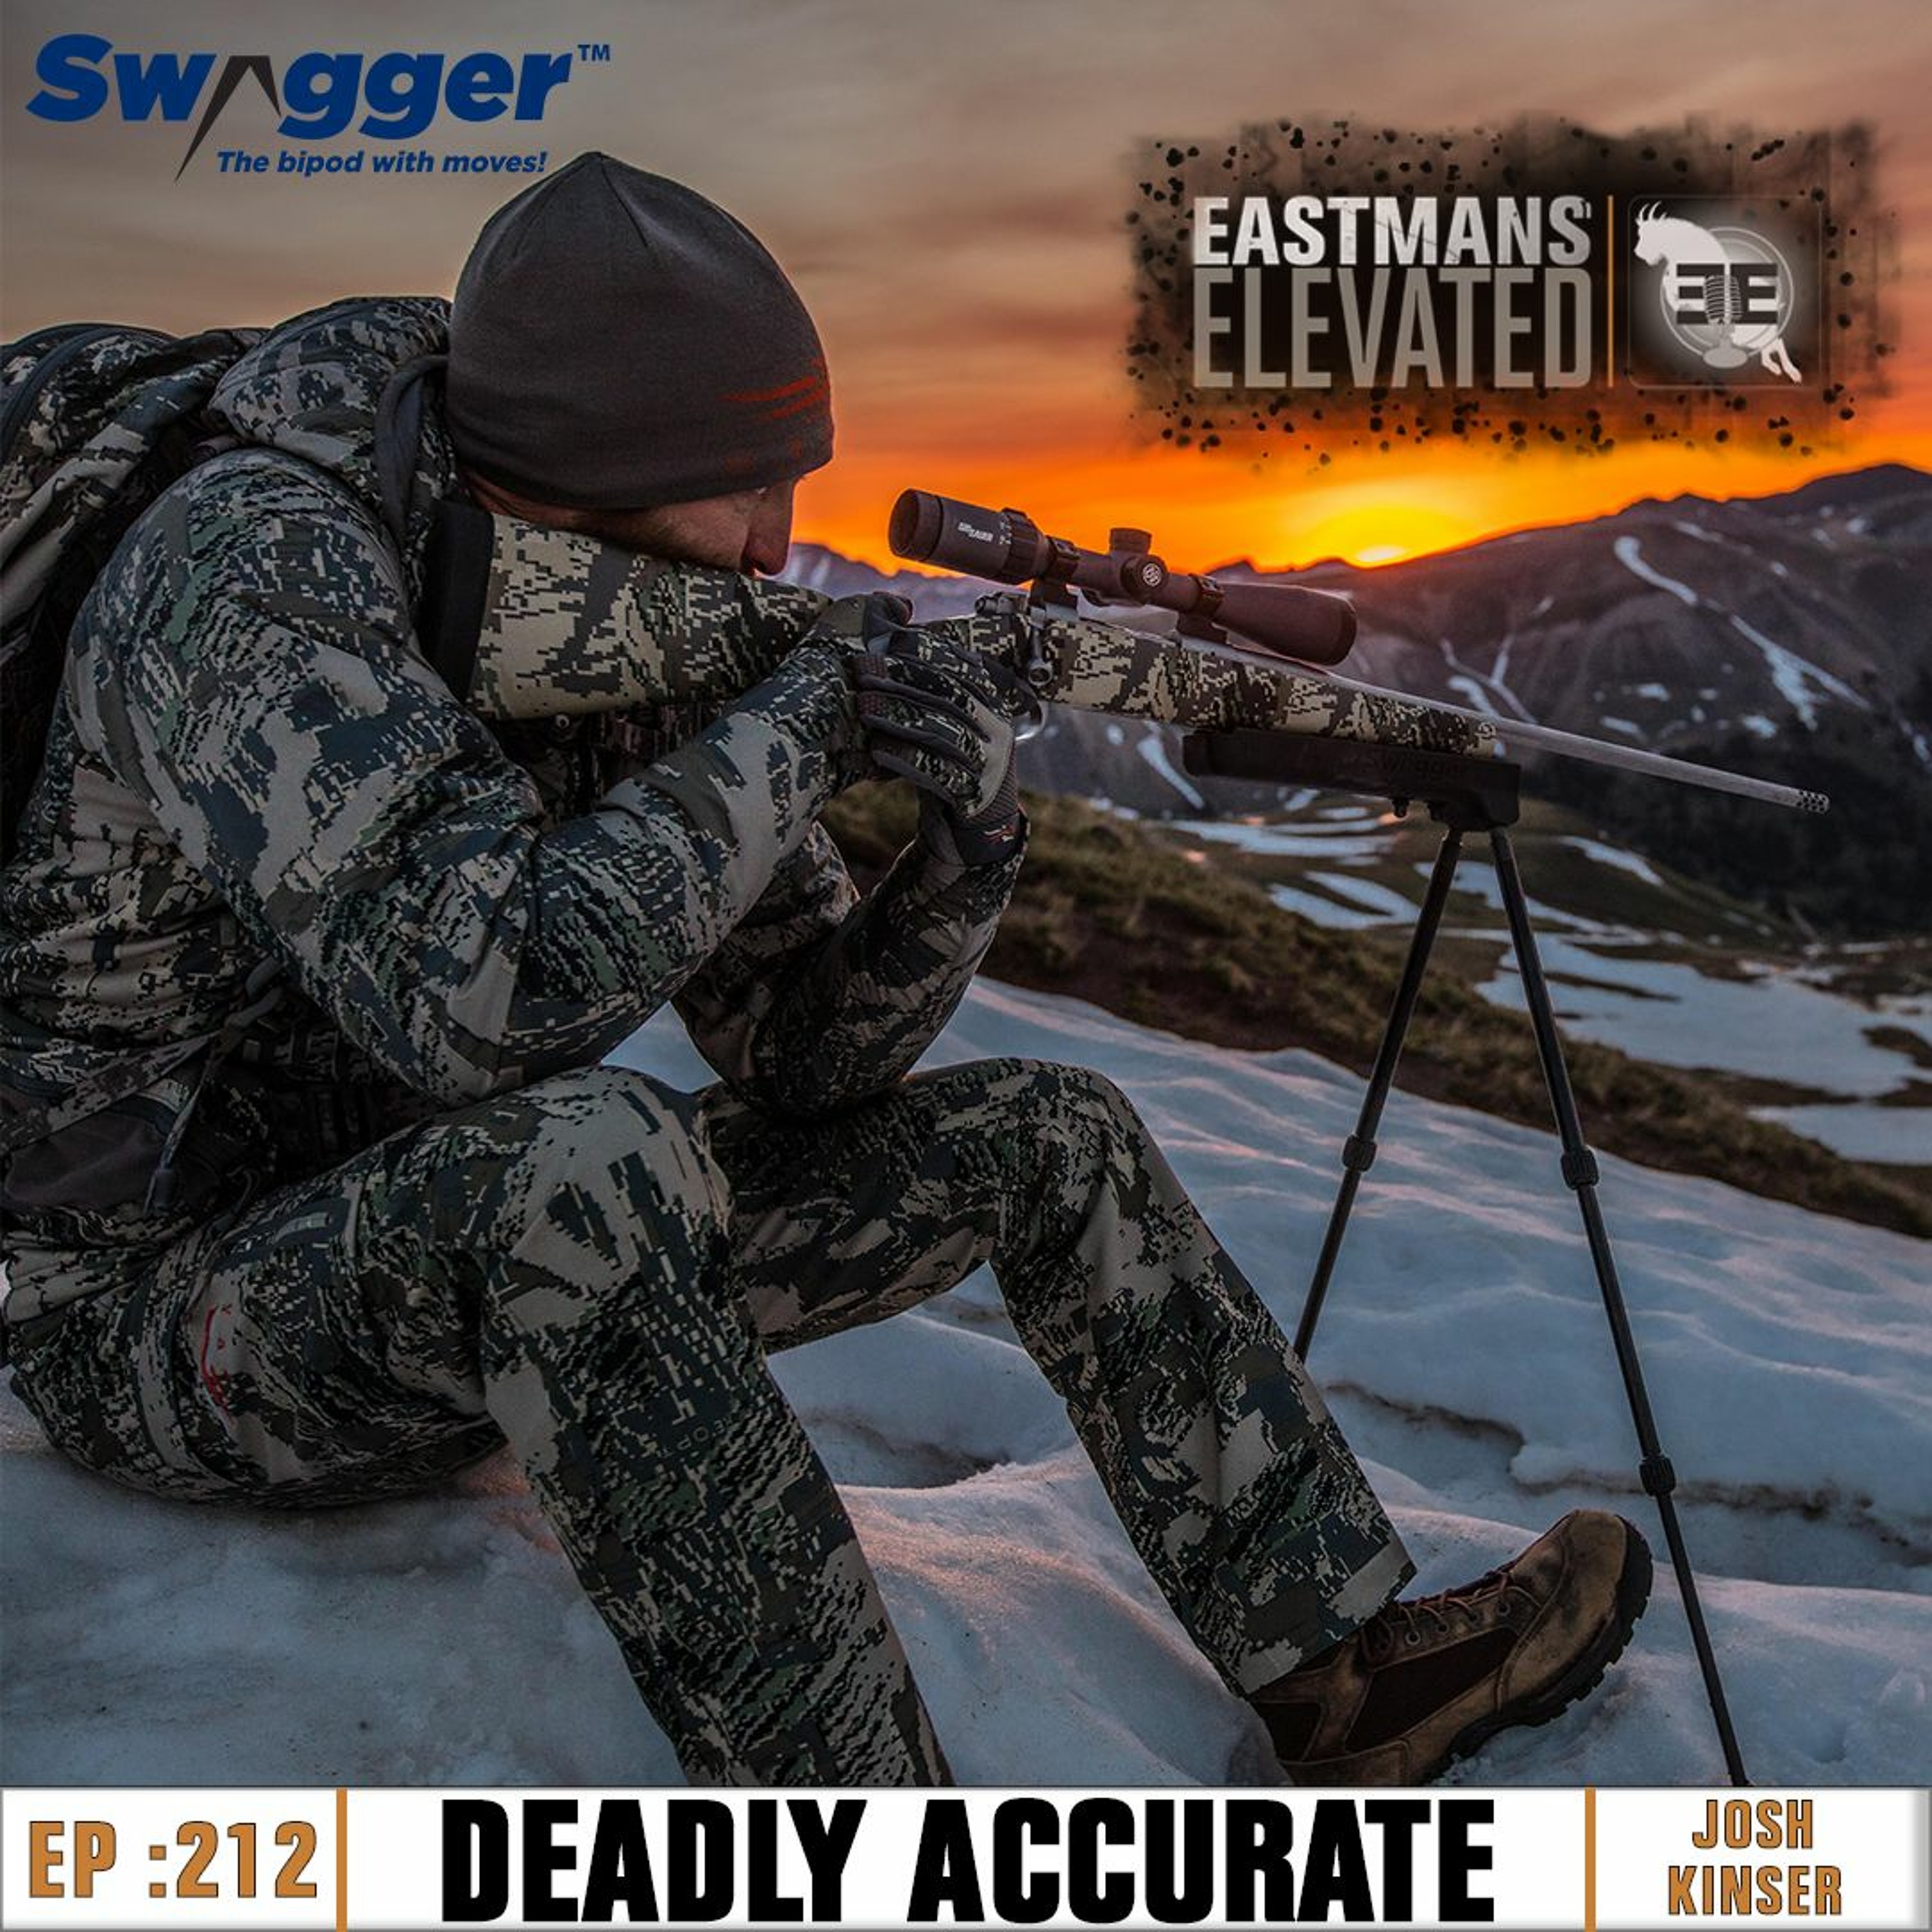 Episode 212: Deadly Accurate with Josh Kinser from Swagger